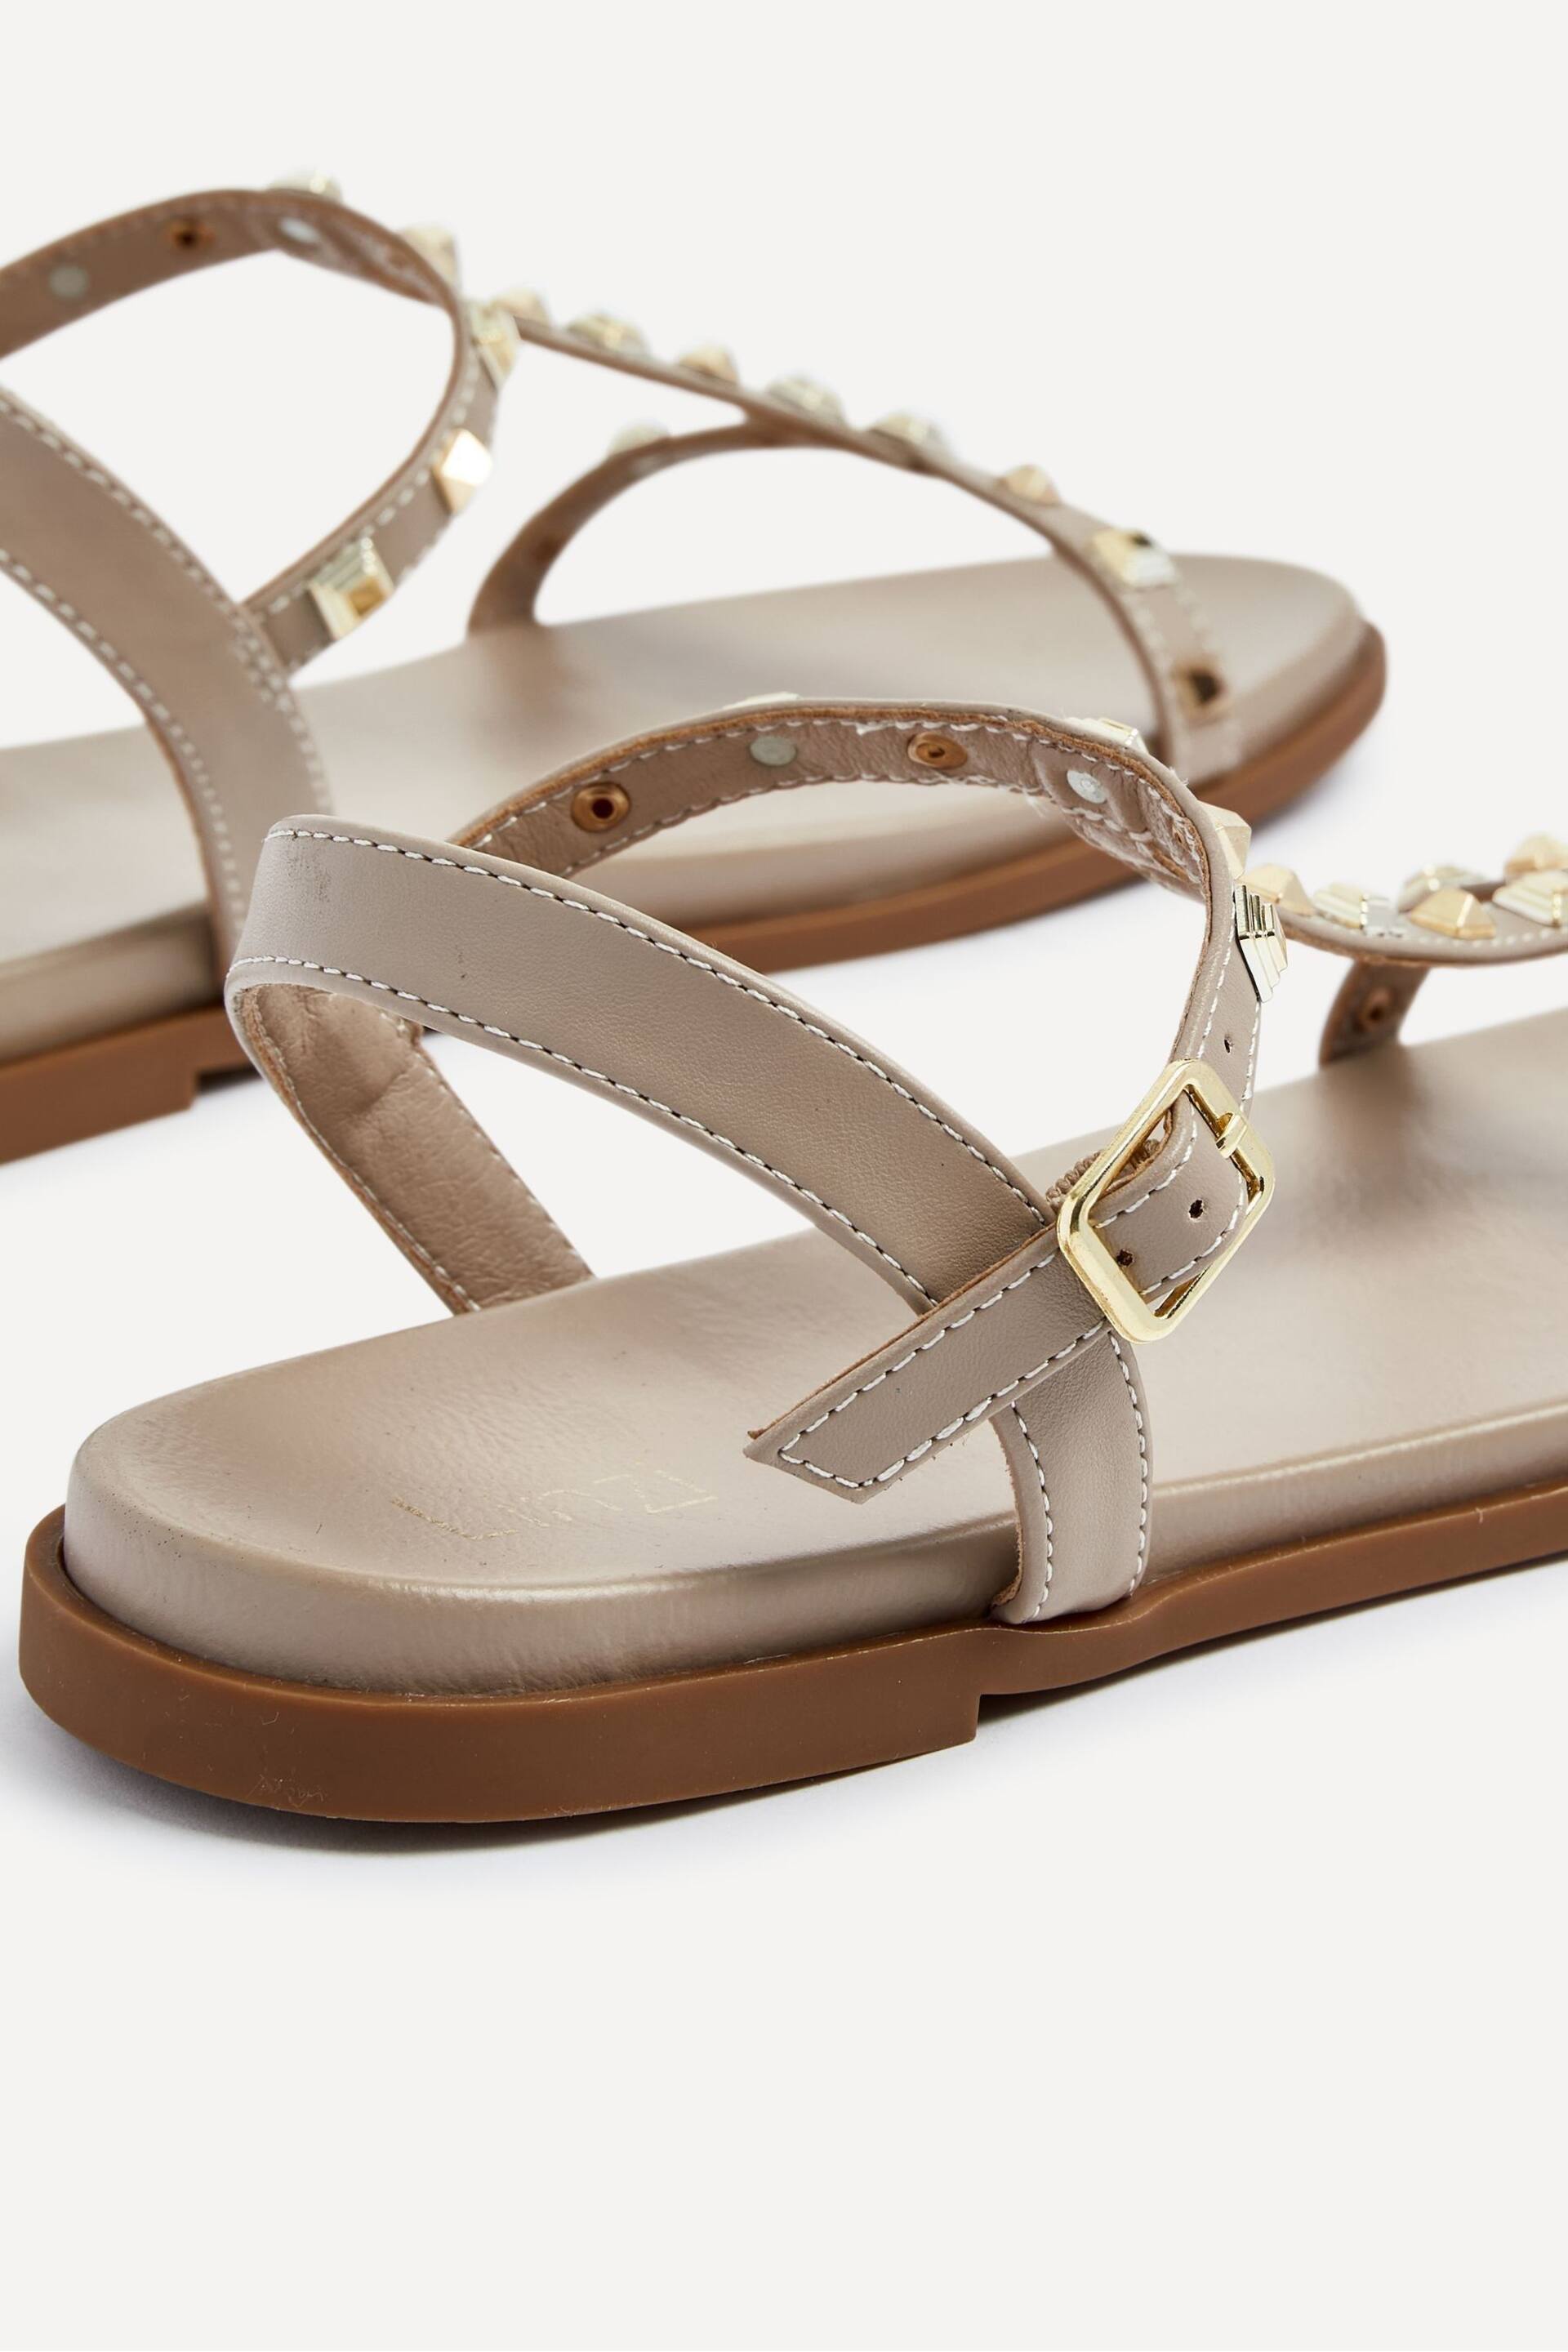 Linzi Natural Bliss T-Post Flat Sandals With Stud Embellishment - Image 5 of 5